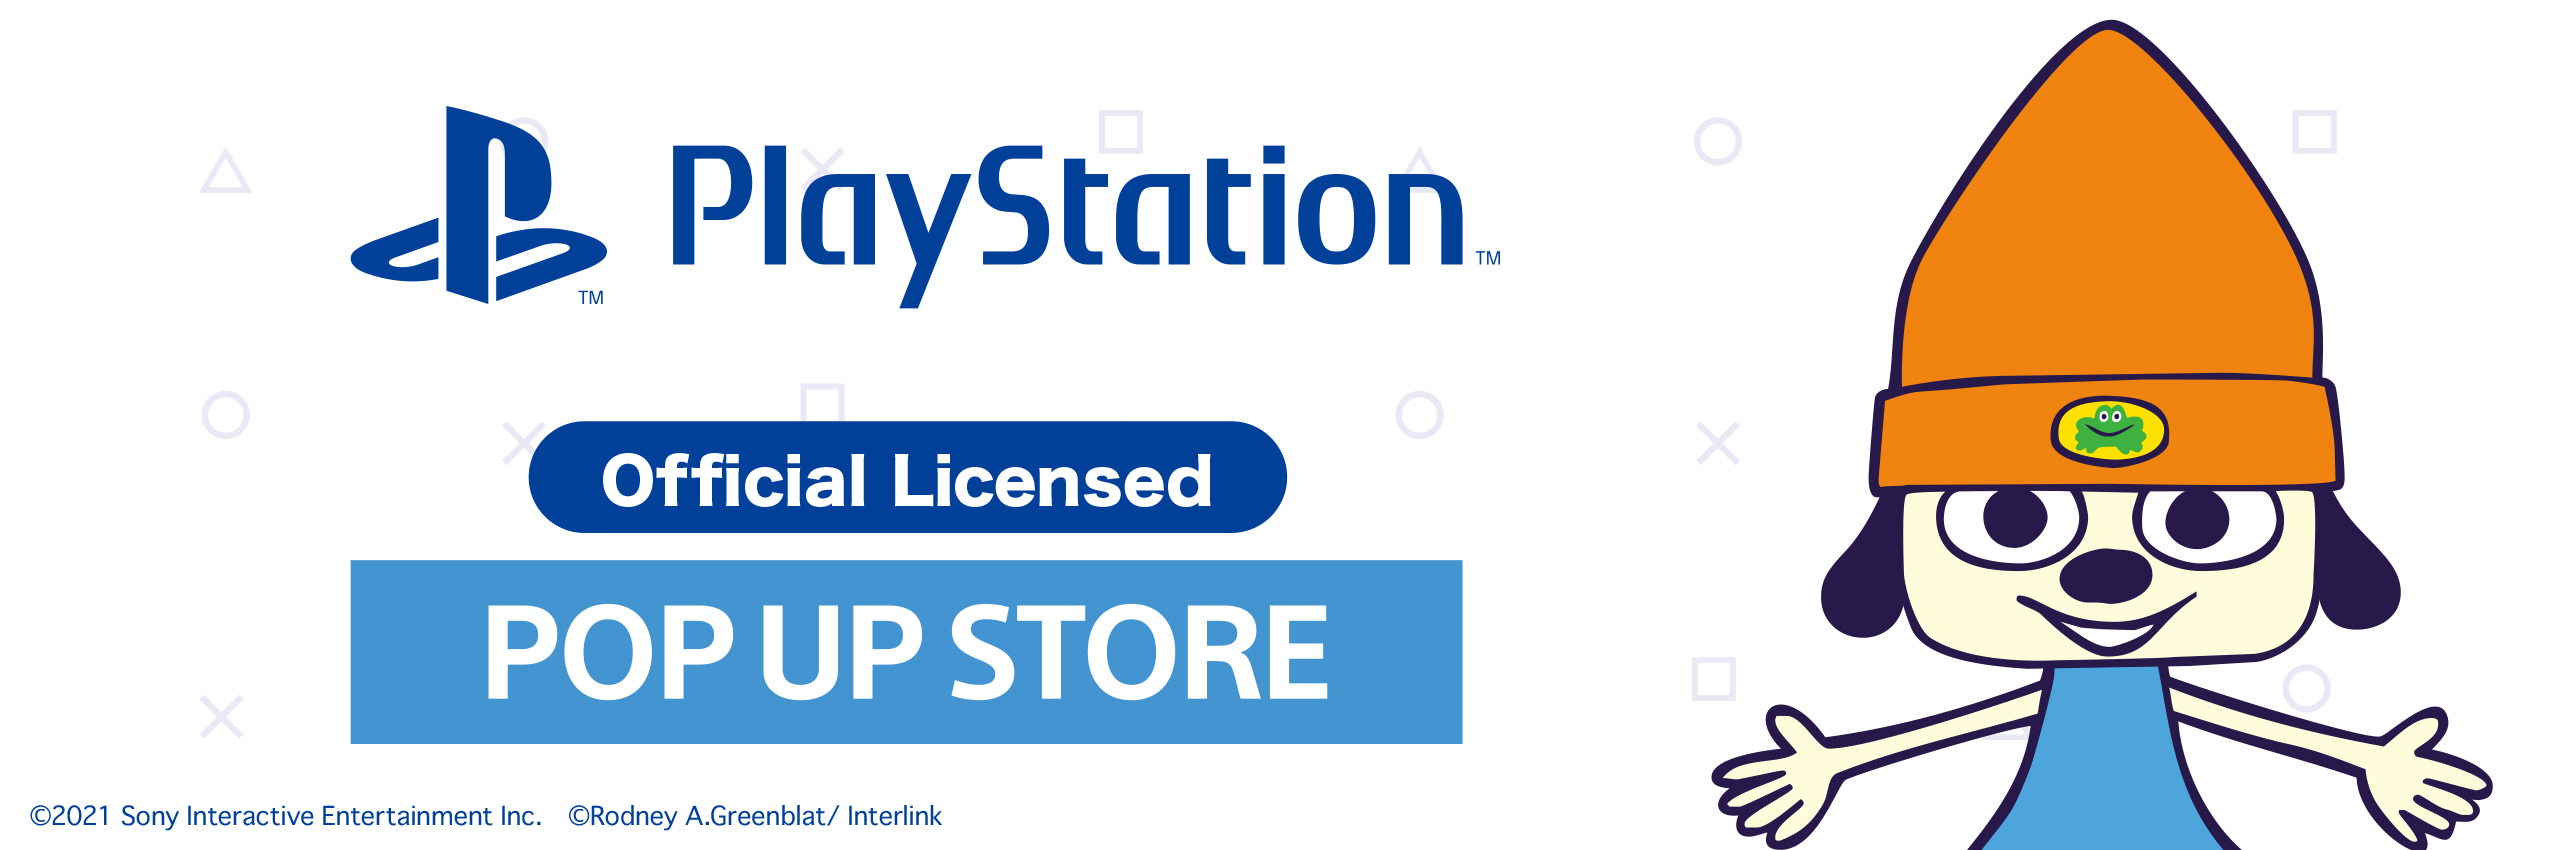 PlayStation POPUP STORE